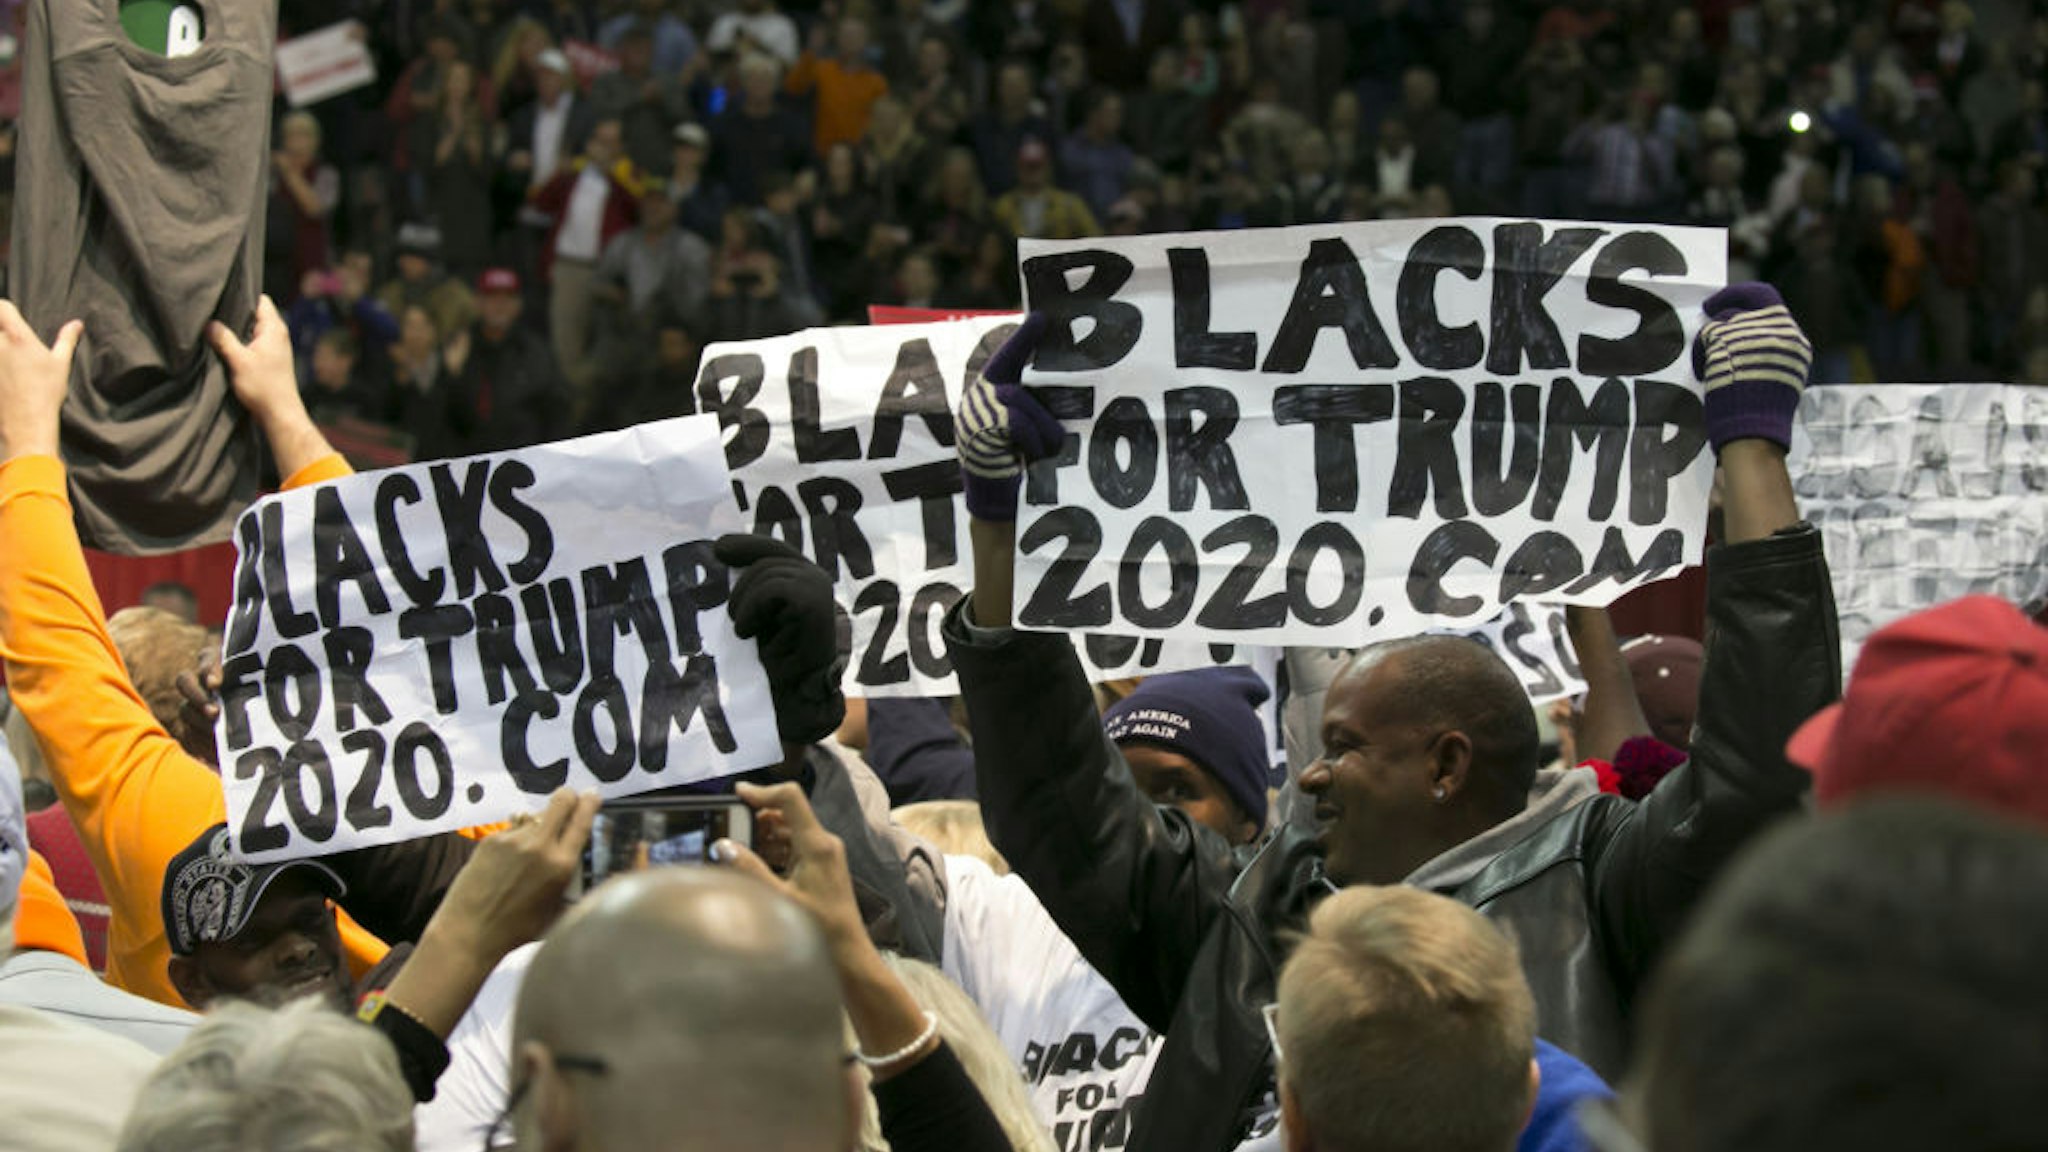 Attendees hold "Blacks For Trump" during a campaign rally with U.S. President Donald Trump in Pensacola, Florida, U.S., on Friday, Dec. 8, 2017.